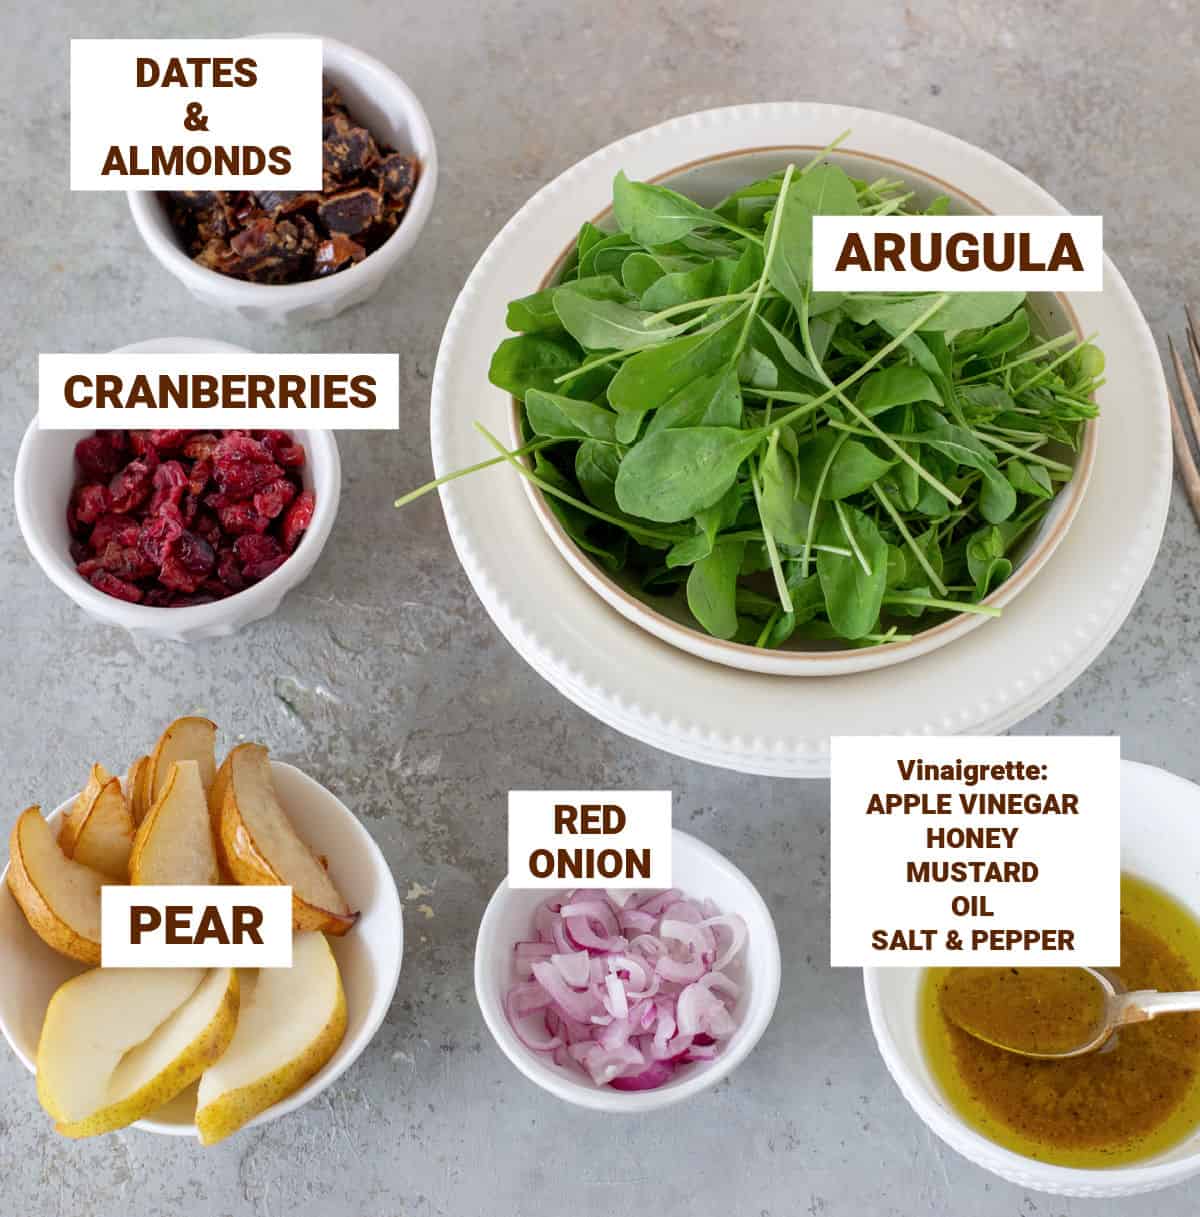 Pear arugula salad ingredients in bowls on grey surface including dates, onion, vinaigrette, cranberries, almonds.